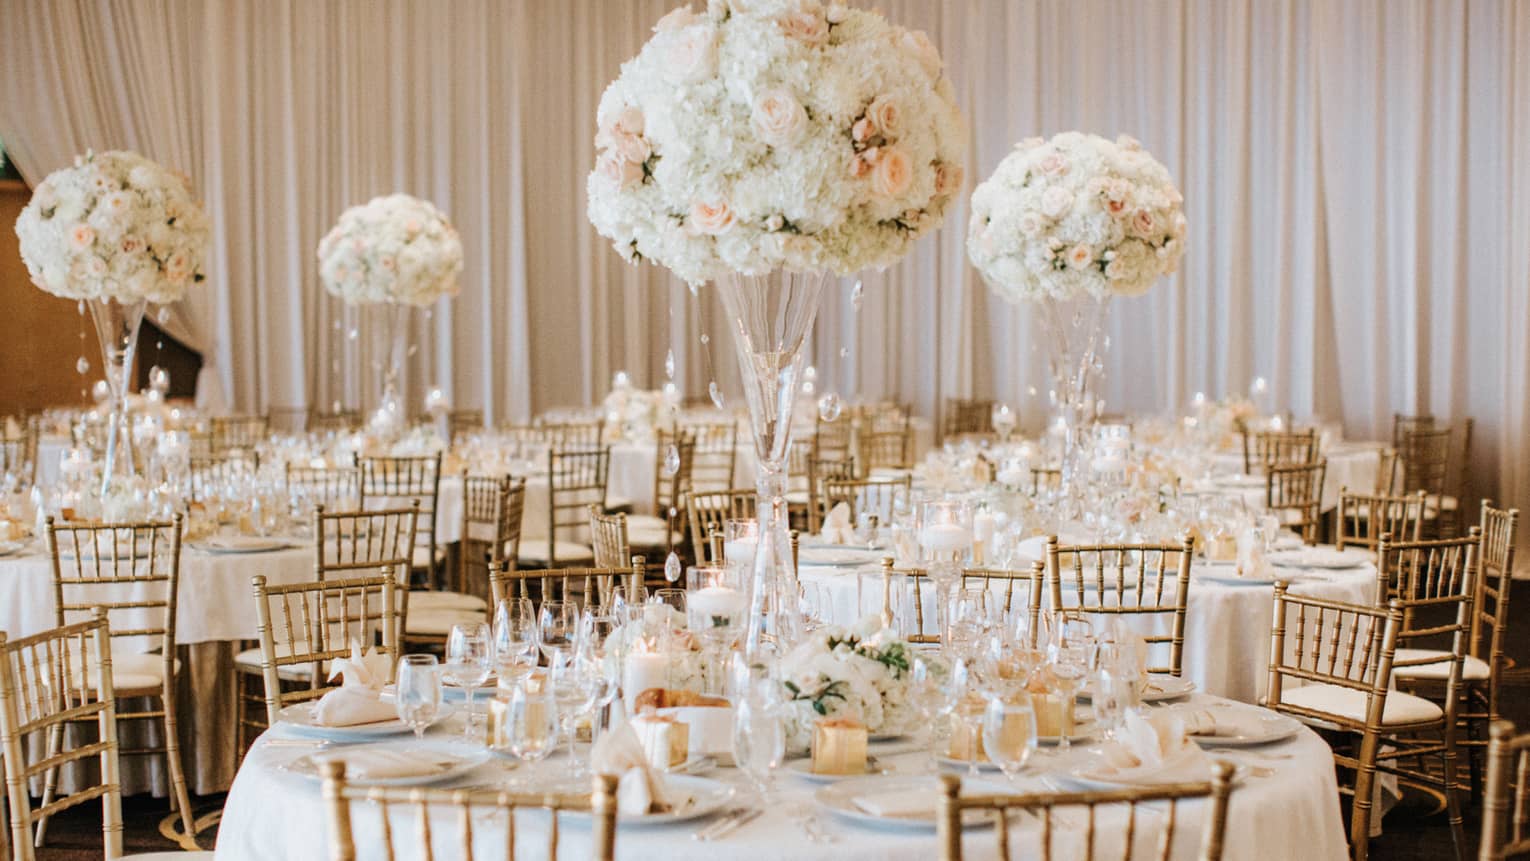 Round tables with white table cloths, wood chairs, white flowers, and white table settings.